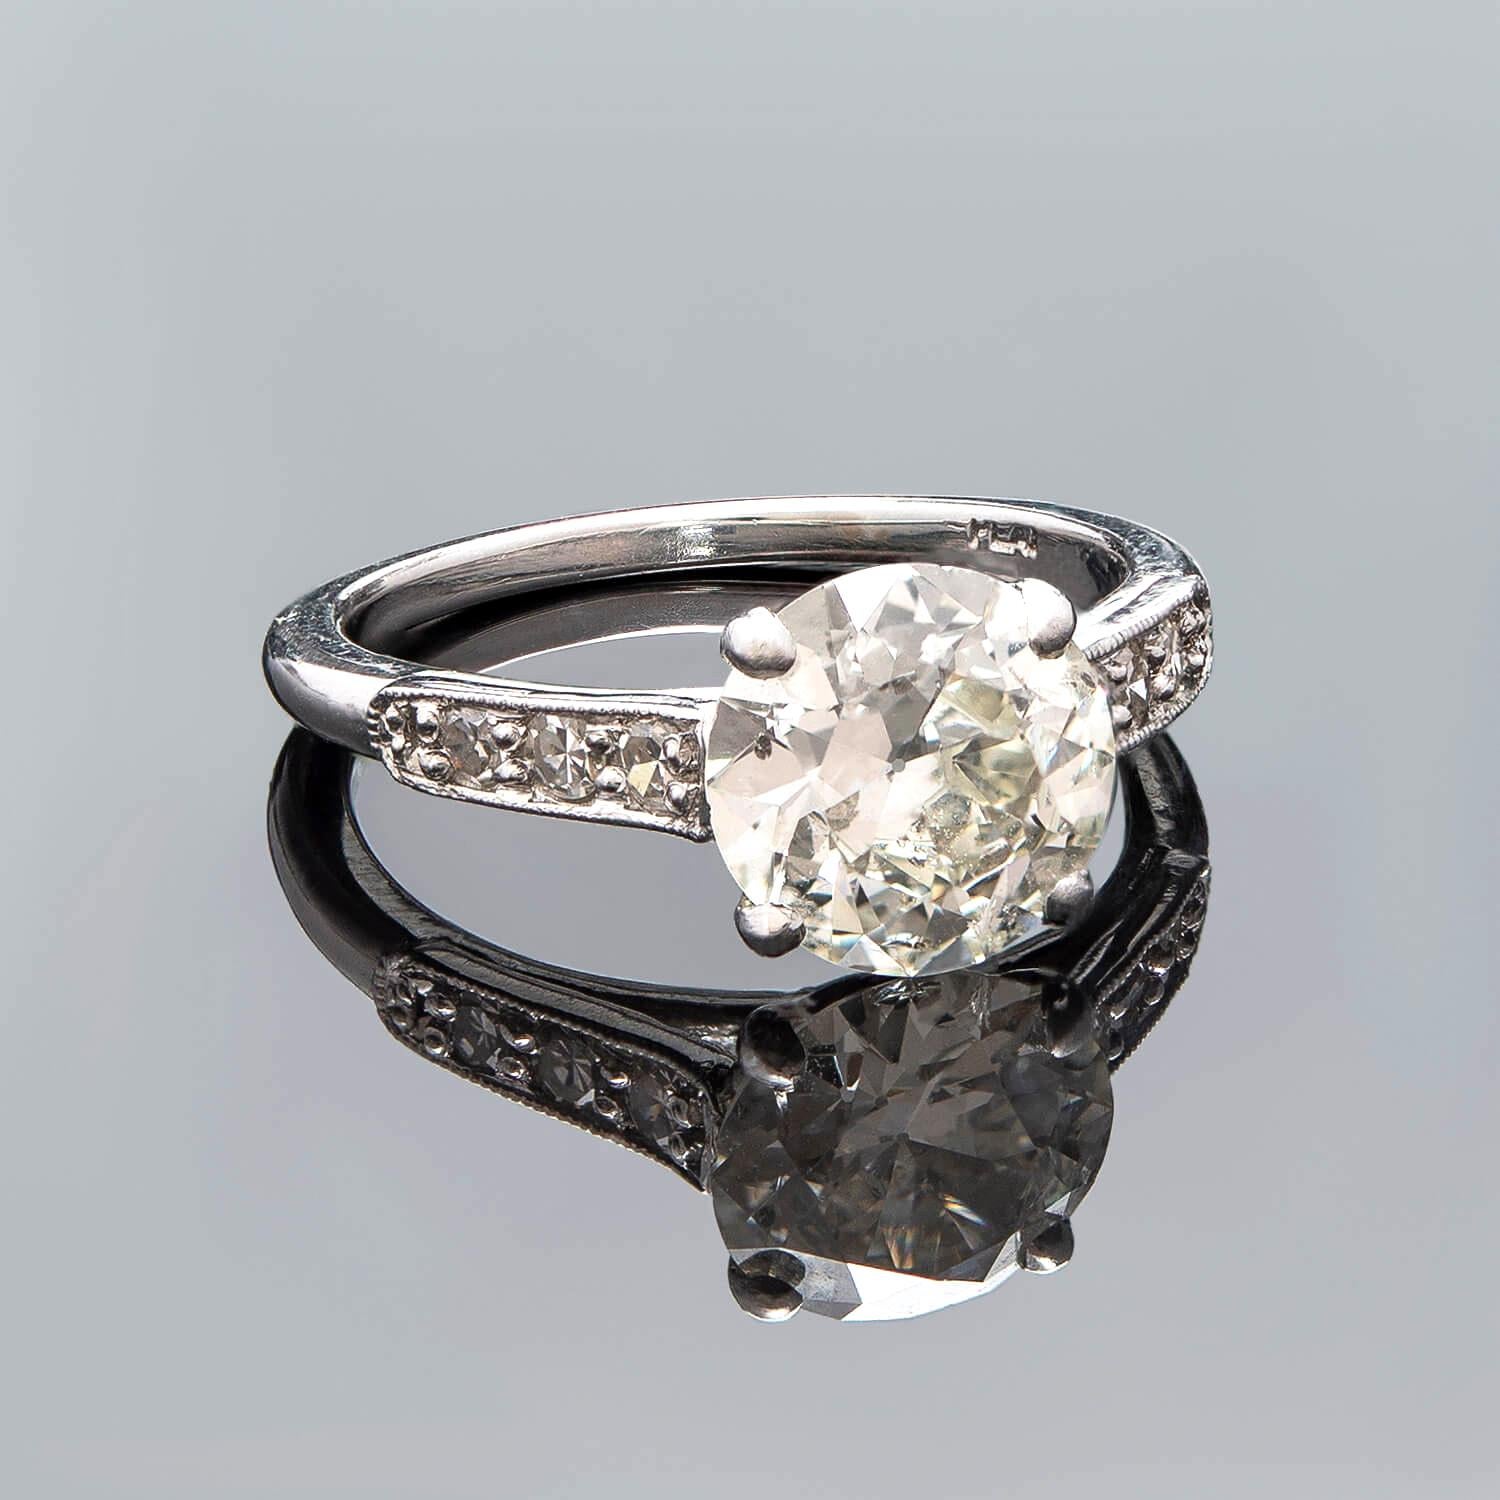 A gorgeous diamond engagement ring from the Art Deco (ca1930) era! This stunning piece has a classic platinum mounting that holds a sparkling diamond stone at the center. The old European Cut diamond is four-prong set and has a total weight of